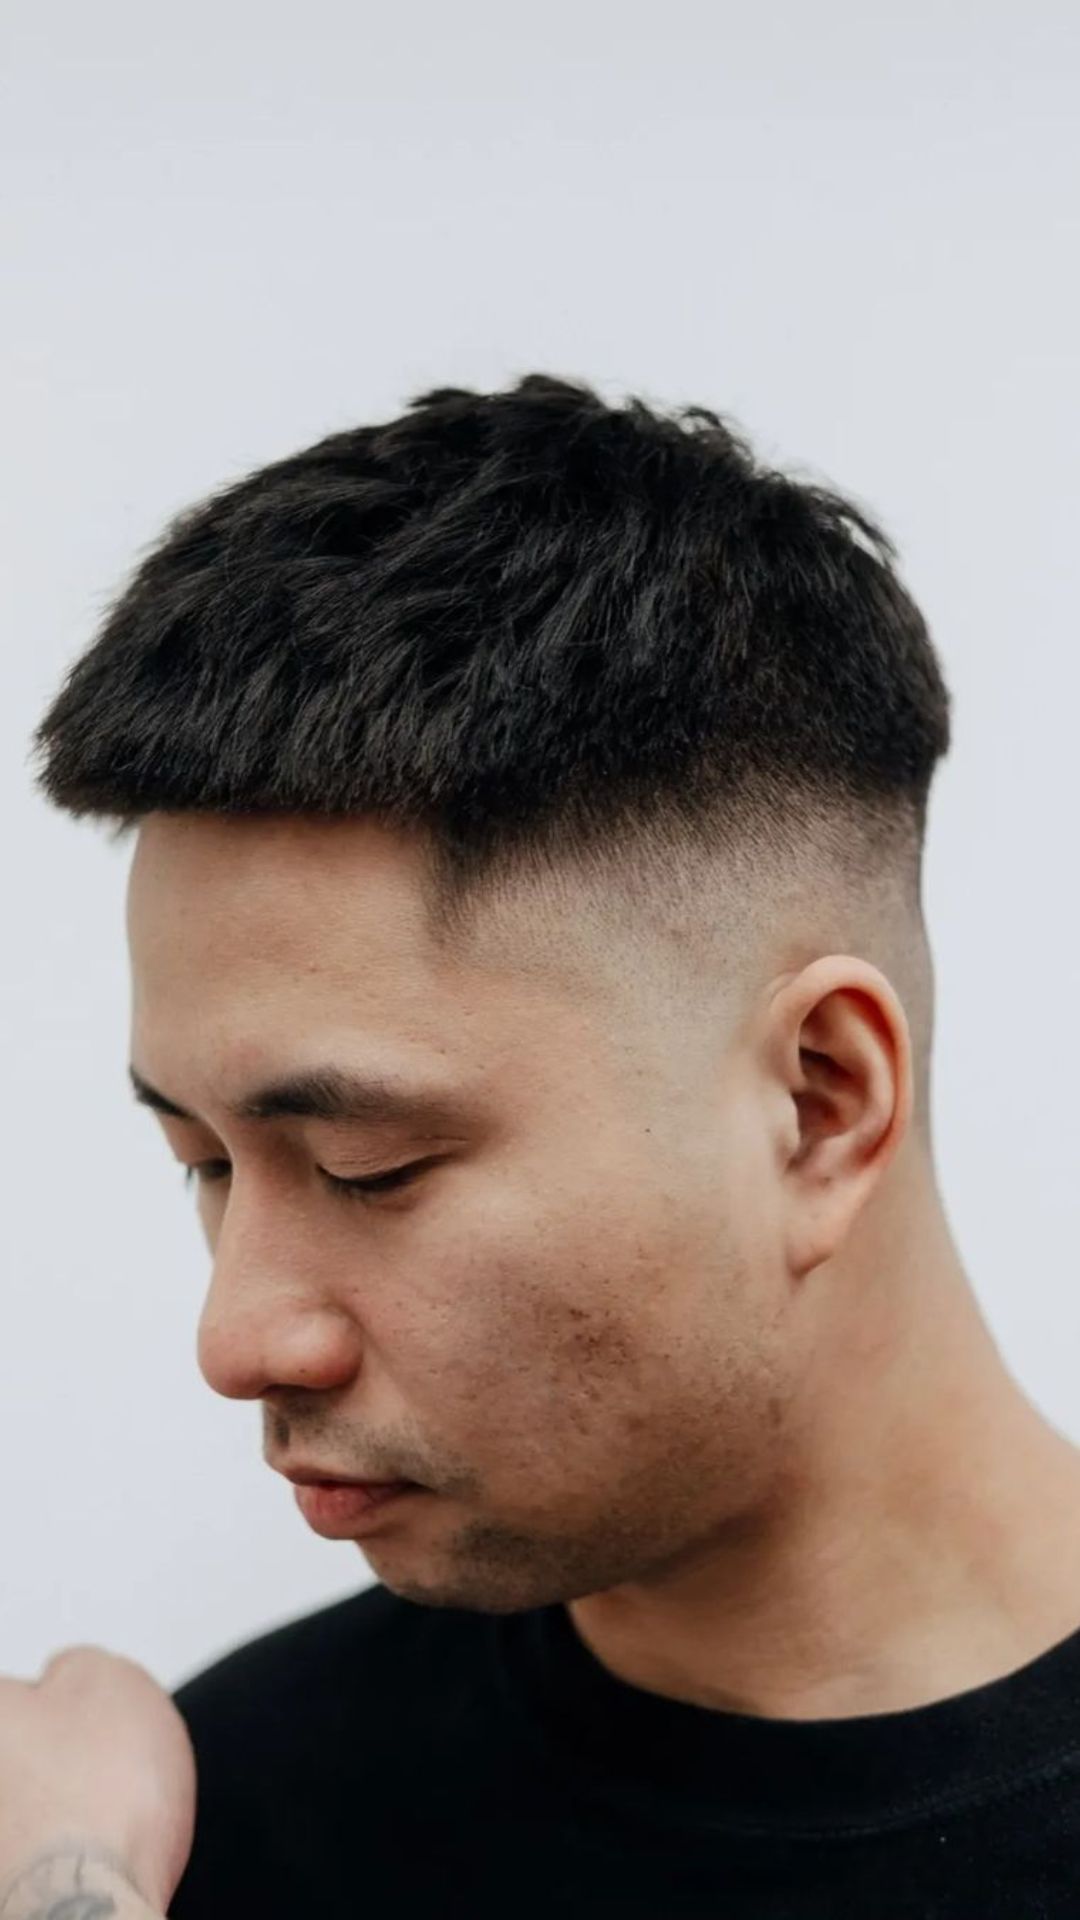 A man with a textured crop and high fade haircut.